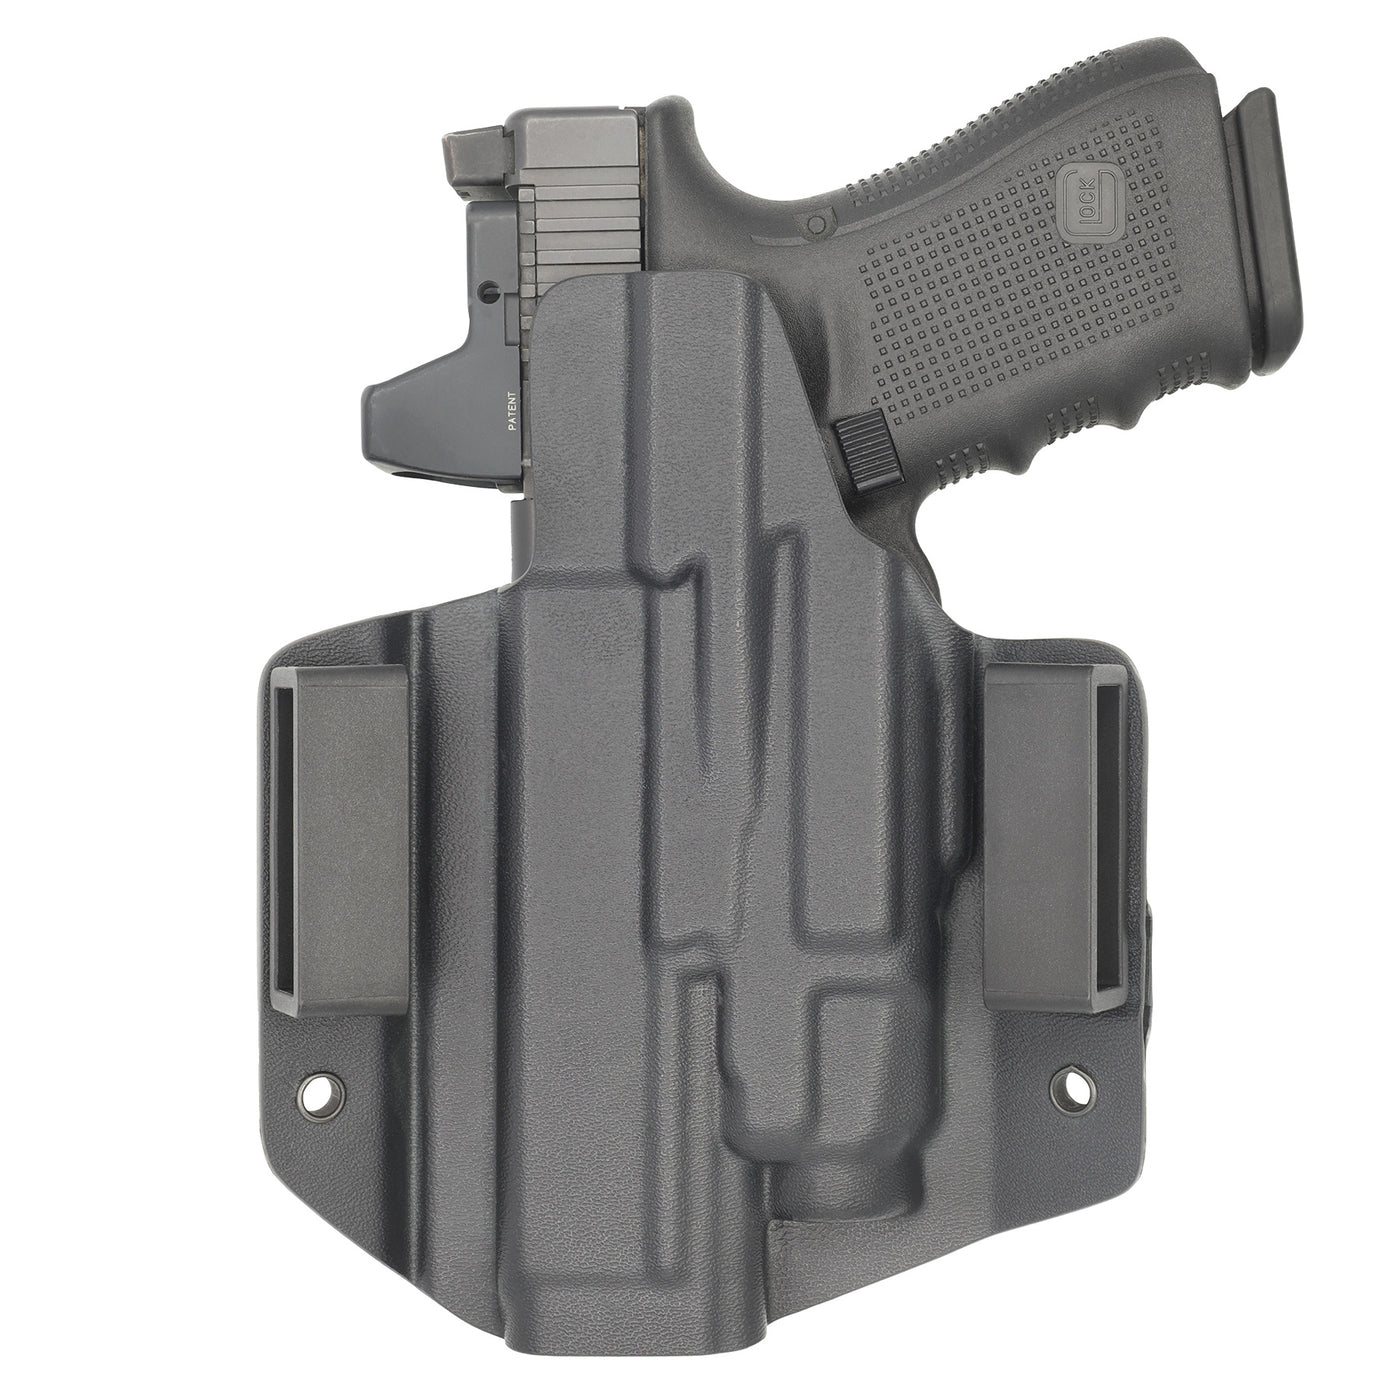 C&G Holsters quickship OWB Tactical Glock 29/30 streamlight TLR7/a in holstered position back view